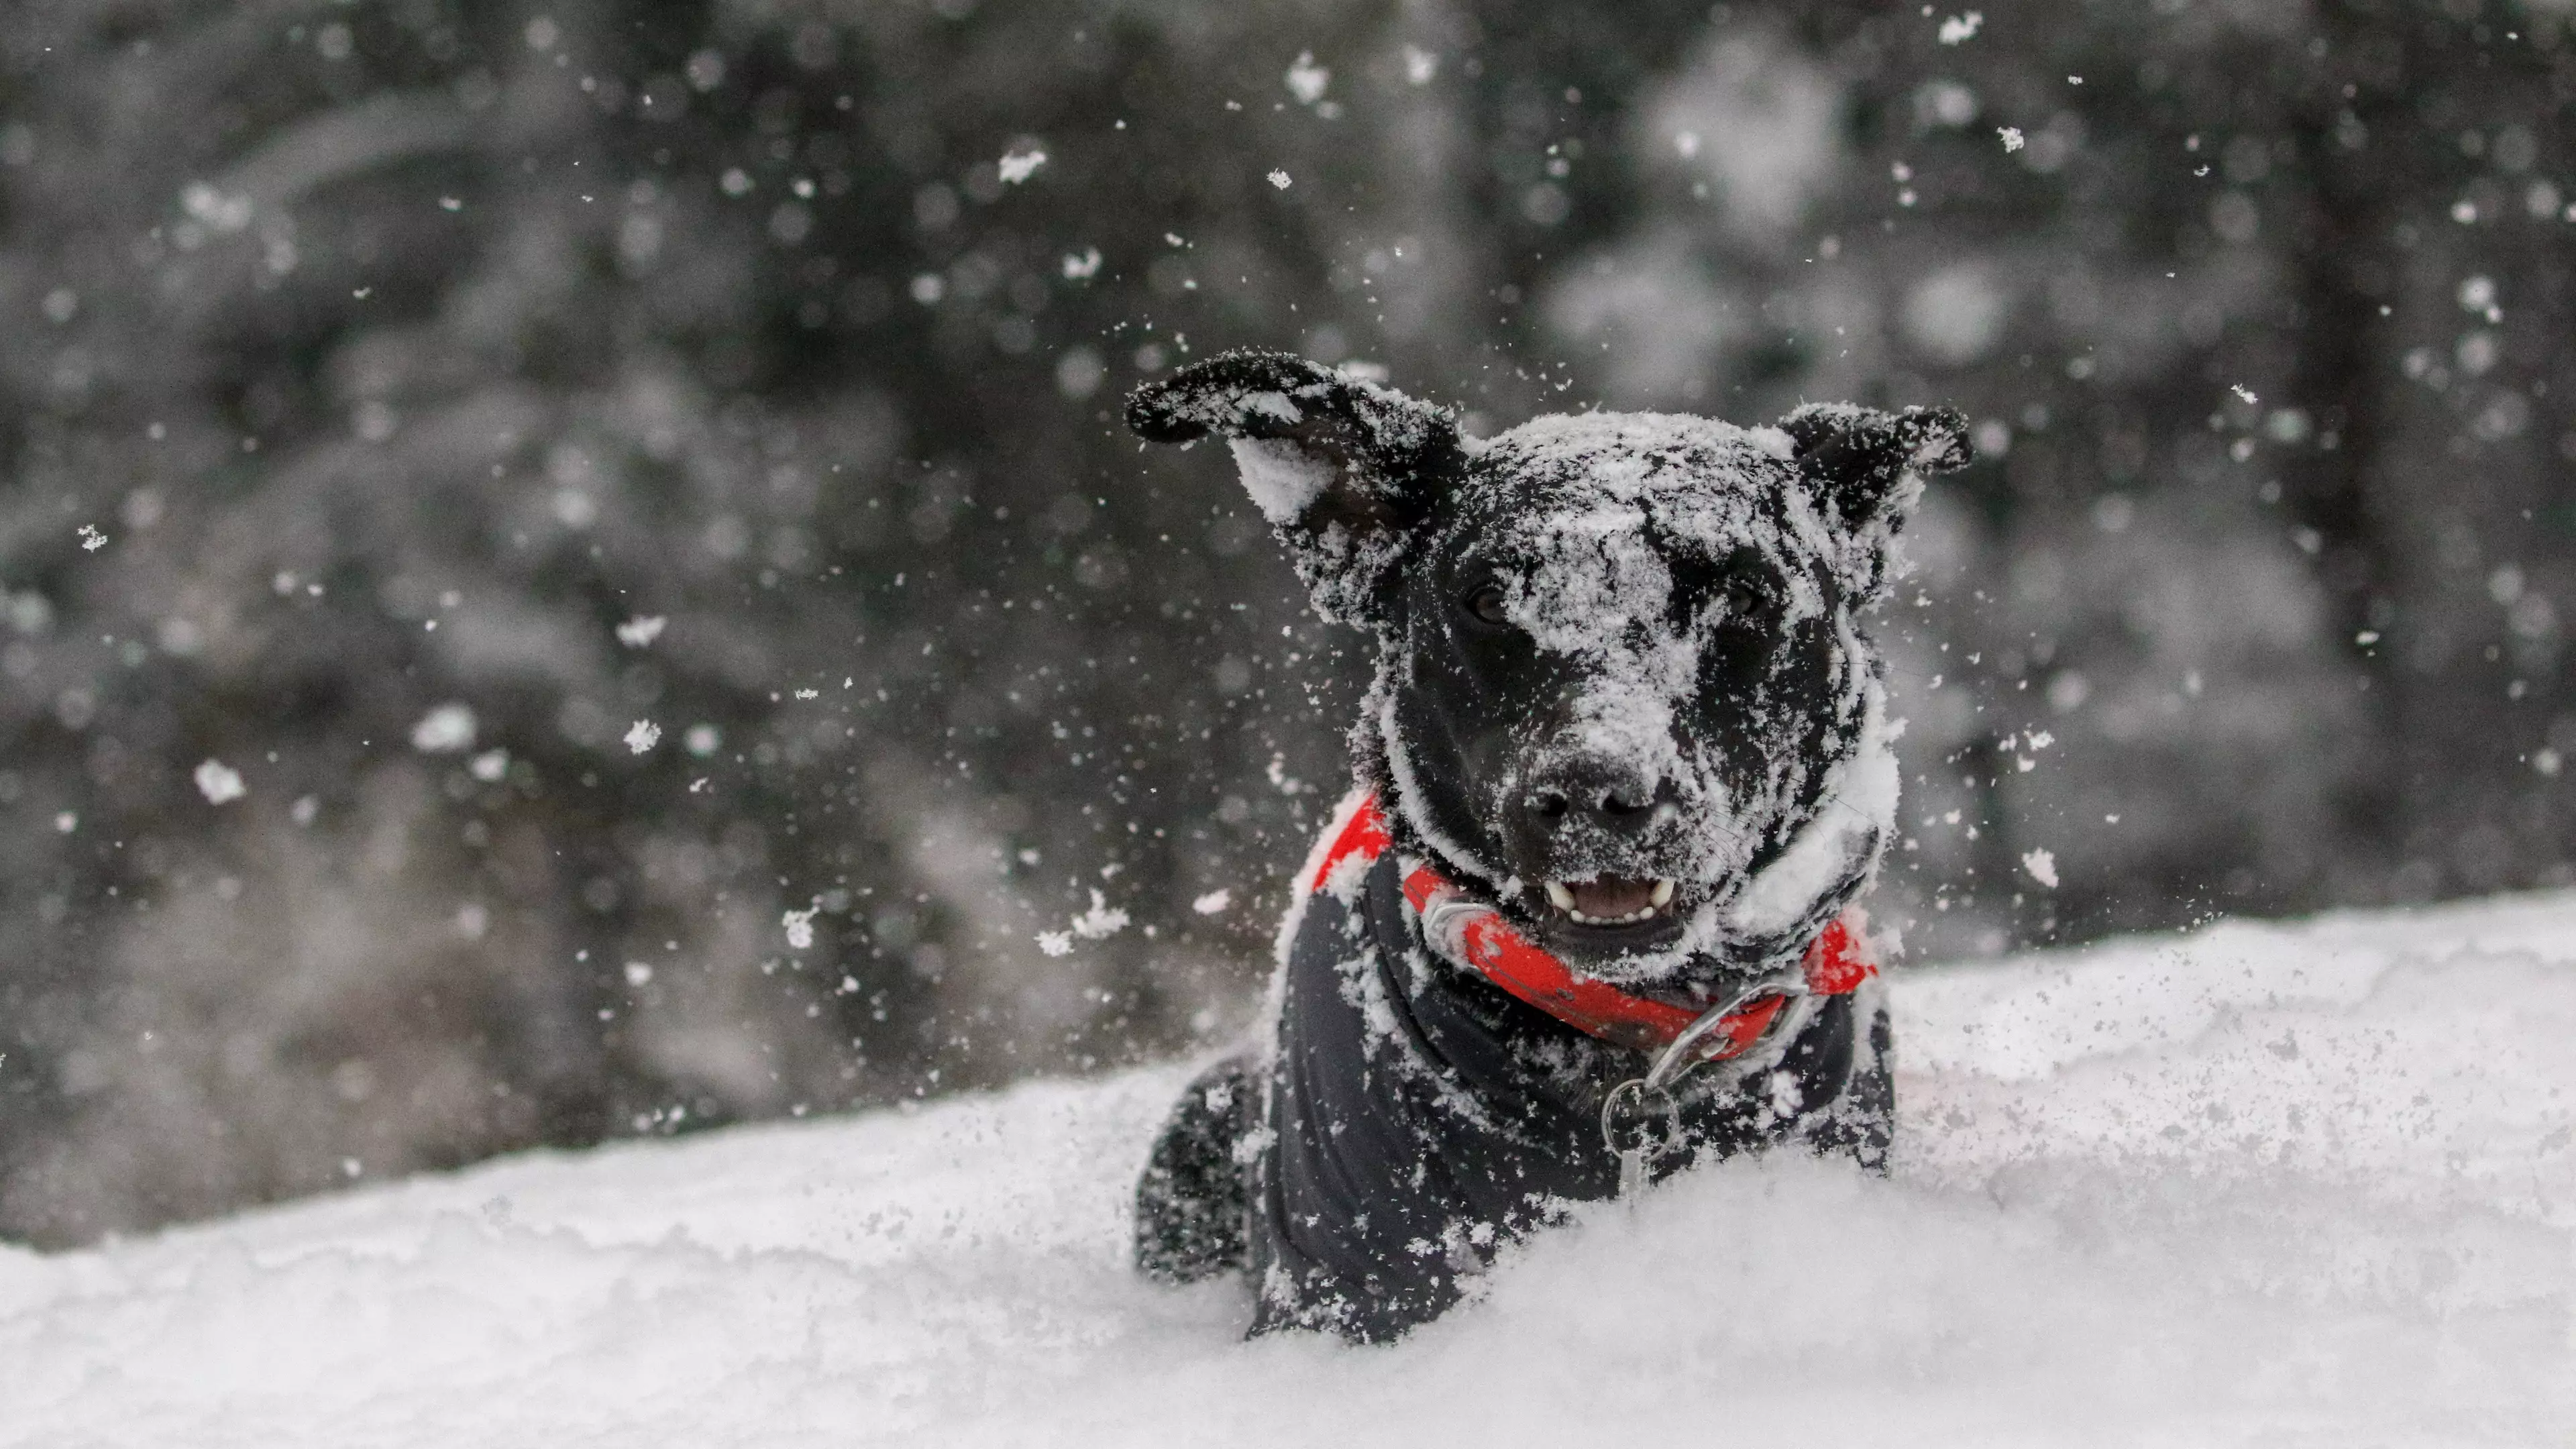 People Are Sharing Pics Of Their Dogs In The Snow And It's Adorable